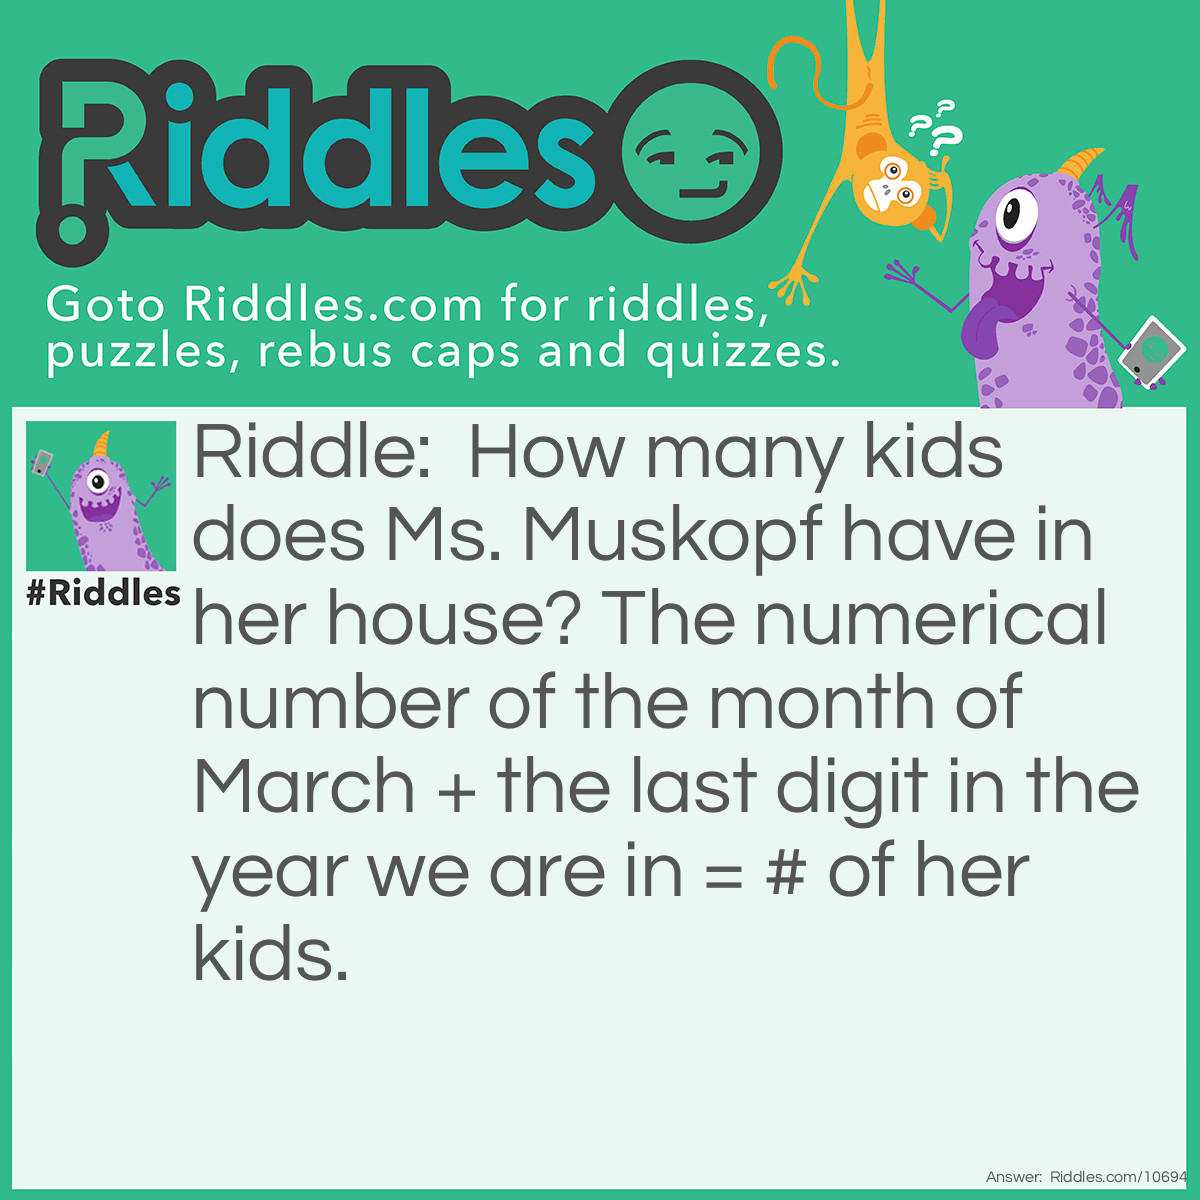 Riddle: How many kids does Ms. Muskopf have in her house? The numerical number of the month of March + the last digit in the year we are in = # of her kids. Answer: 5.